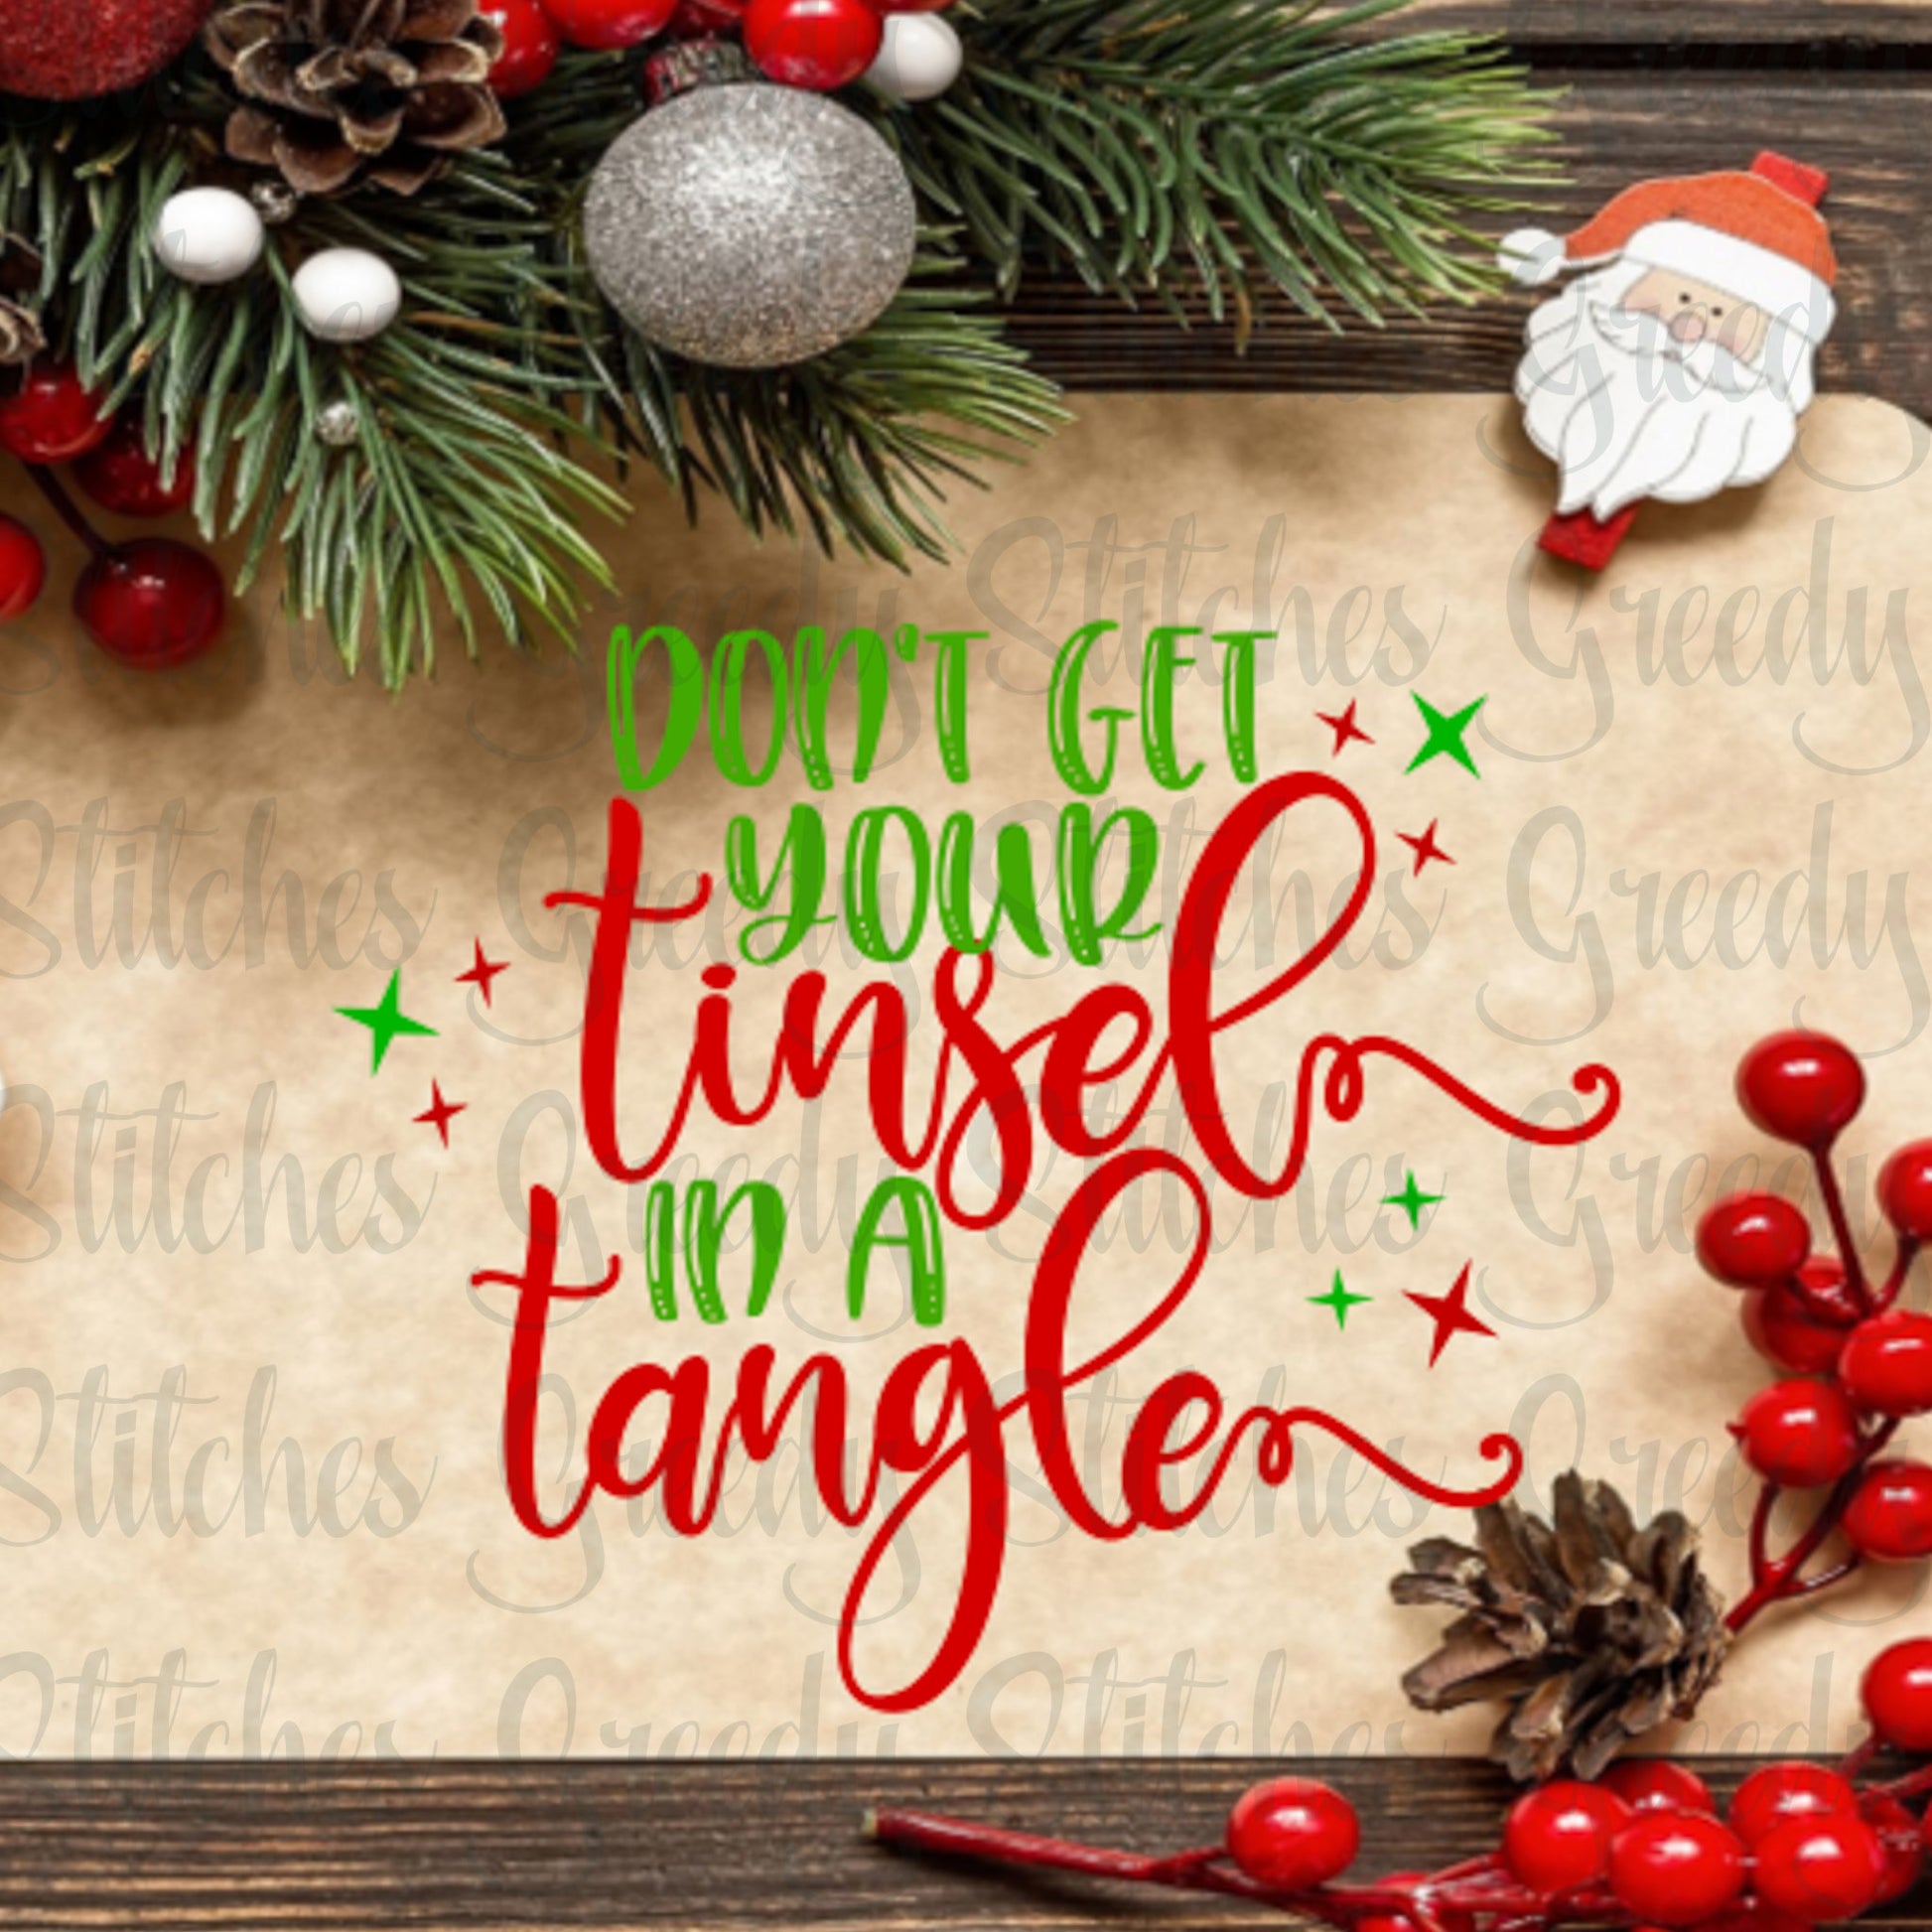 Christmas SvG Don&#39;t Get Your Tinsel In A Tangle svg, dxf, eps, png. Tinsel SvG | Christmas DxF | Tangle DXF | Instant Download Cut Files.